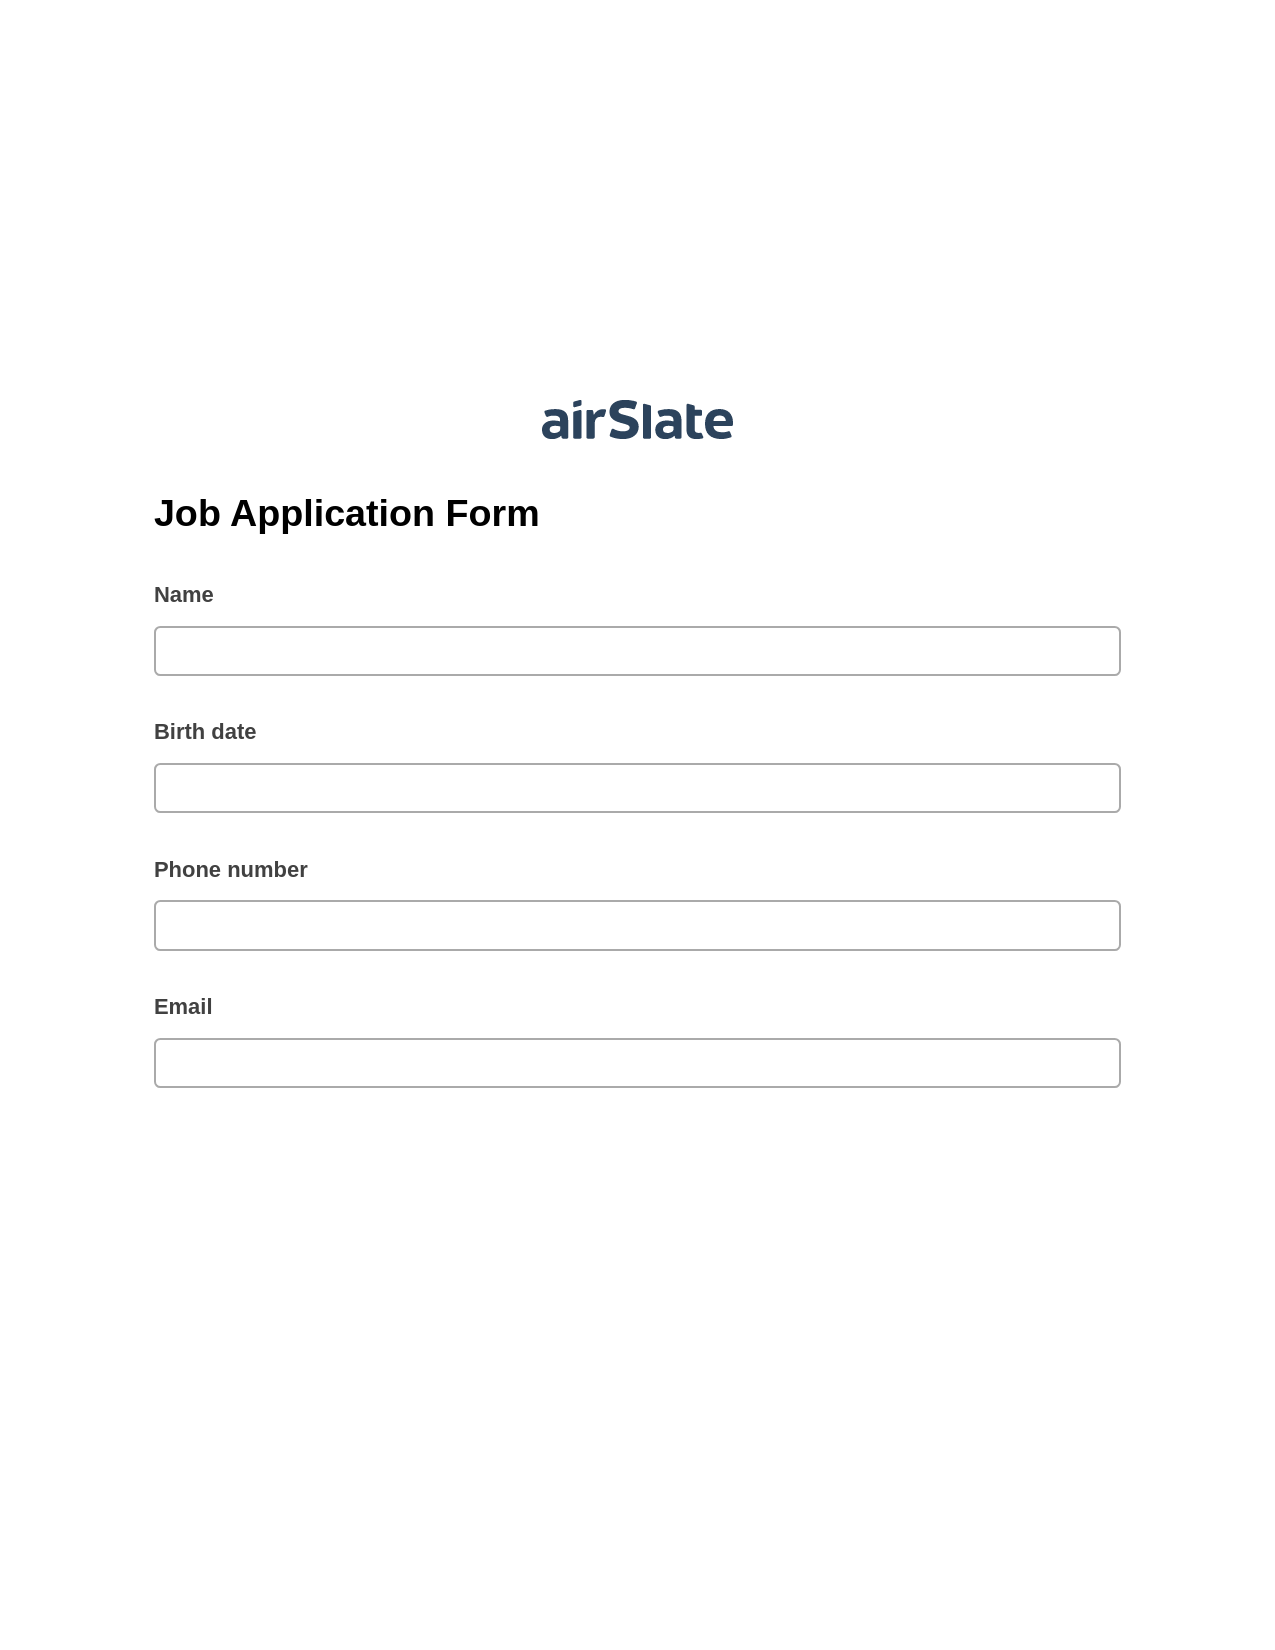 Job Application Form Pre-fill from MySQL Bot, Create NetSuite Records Bot, Archive to SharePoint Folder Bot